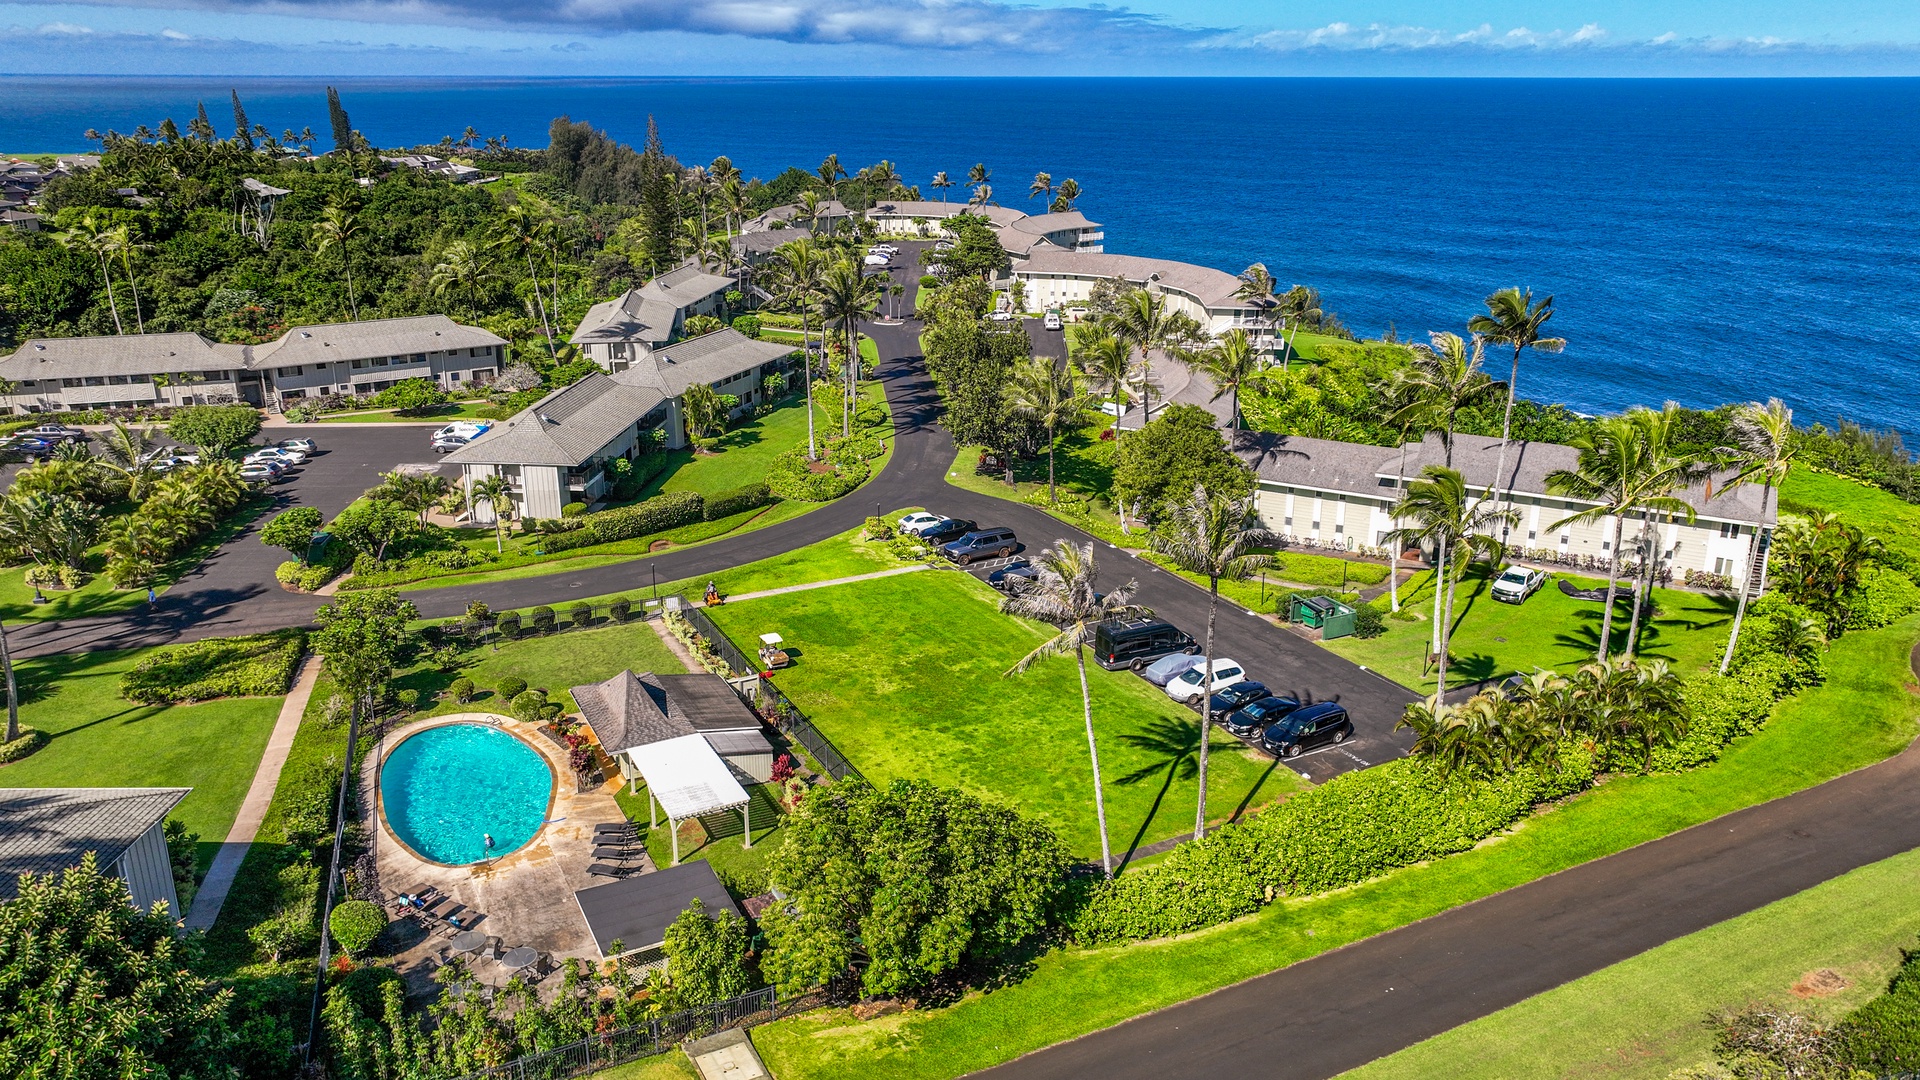 Princeville Vacation Rentals, Alii Kai 7201 - There is a parking space in front of the building.